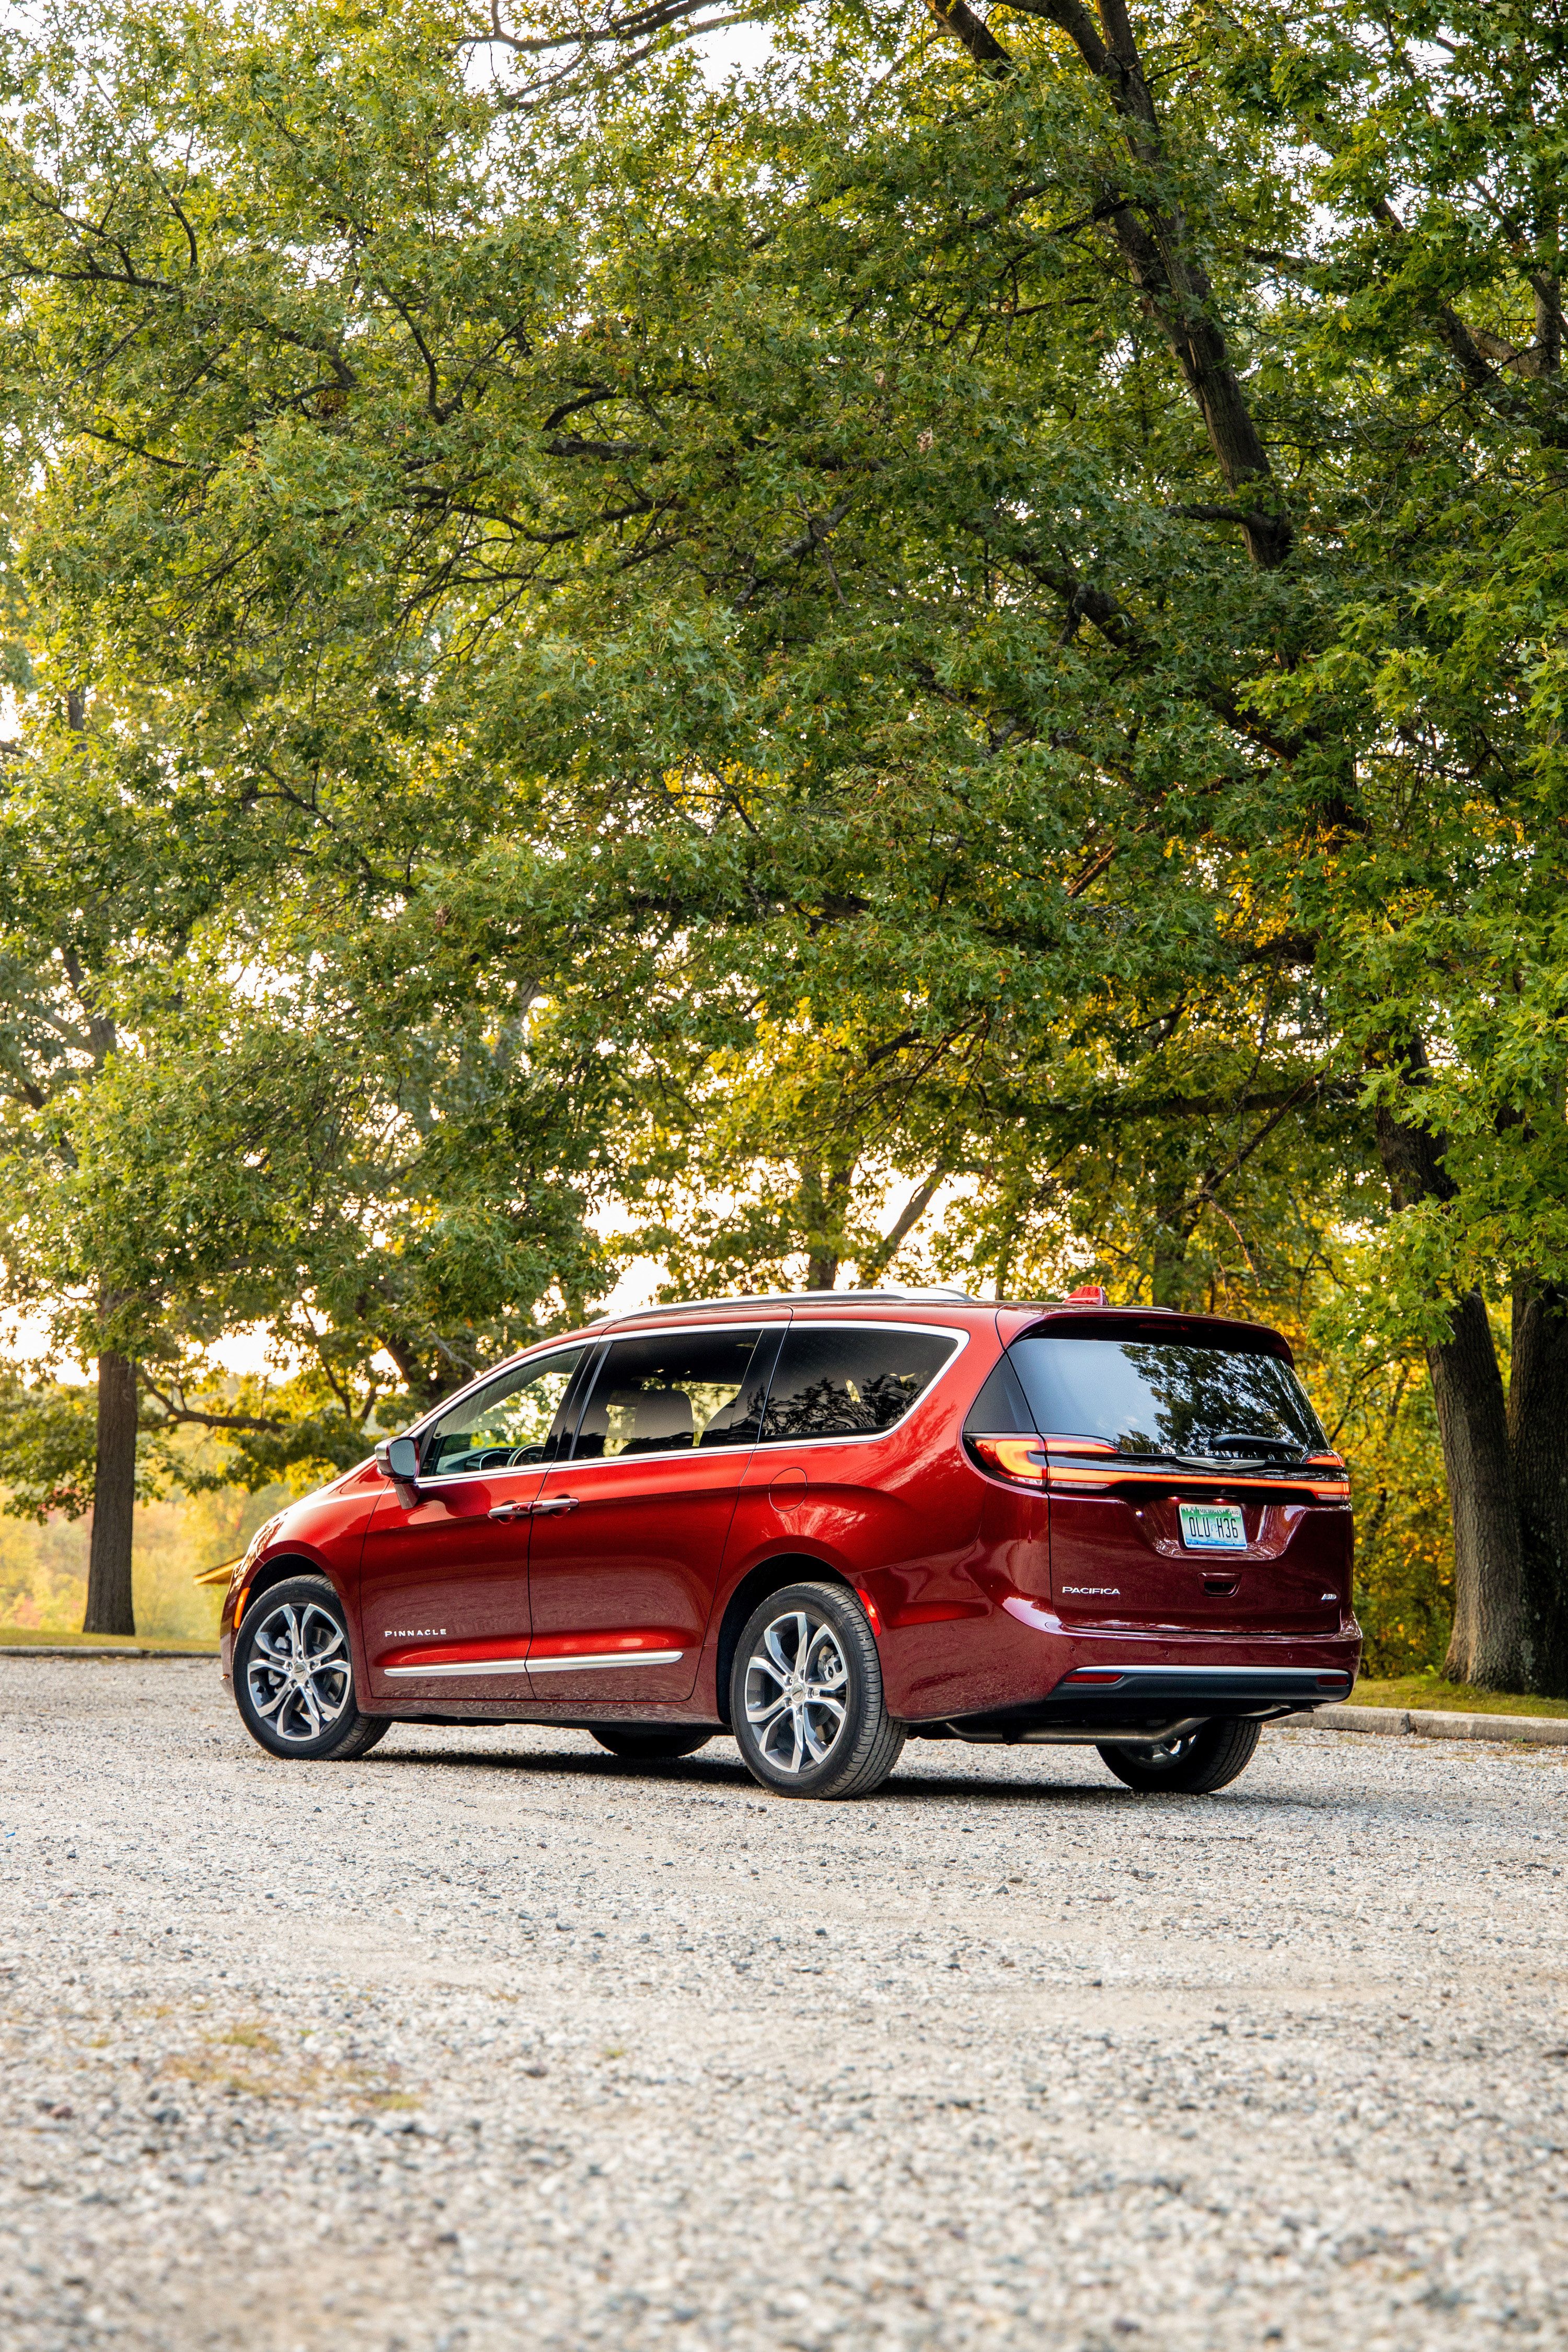 Chrysler Pacifica Minivan Reported to Get a Significant Refresh